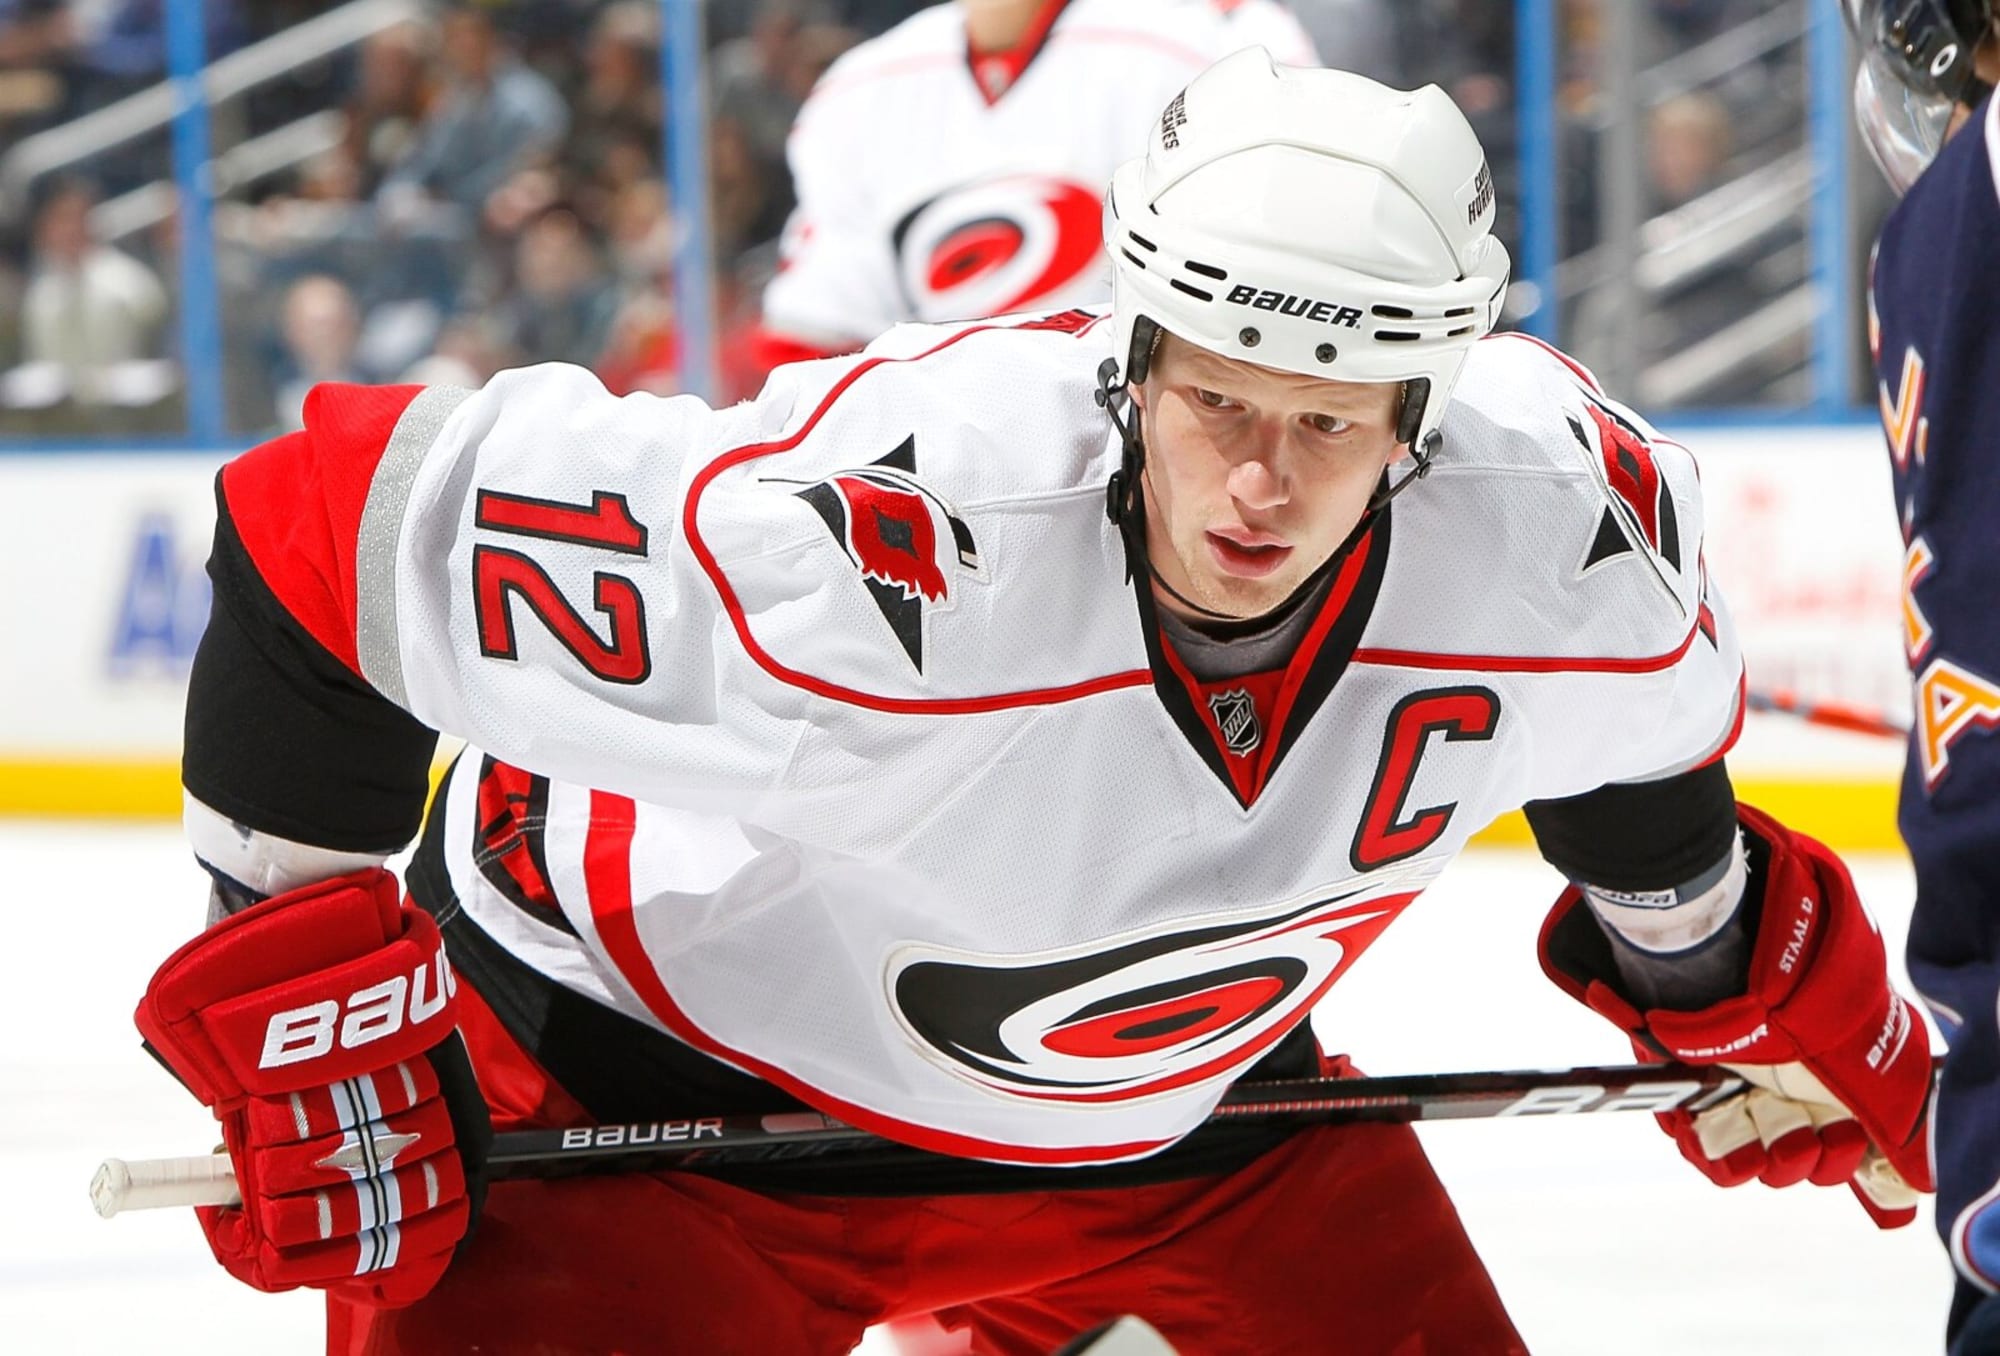 Eric Staal has MCL sprain, expected to start 2013-14 season - Canes Country